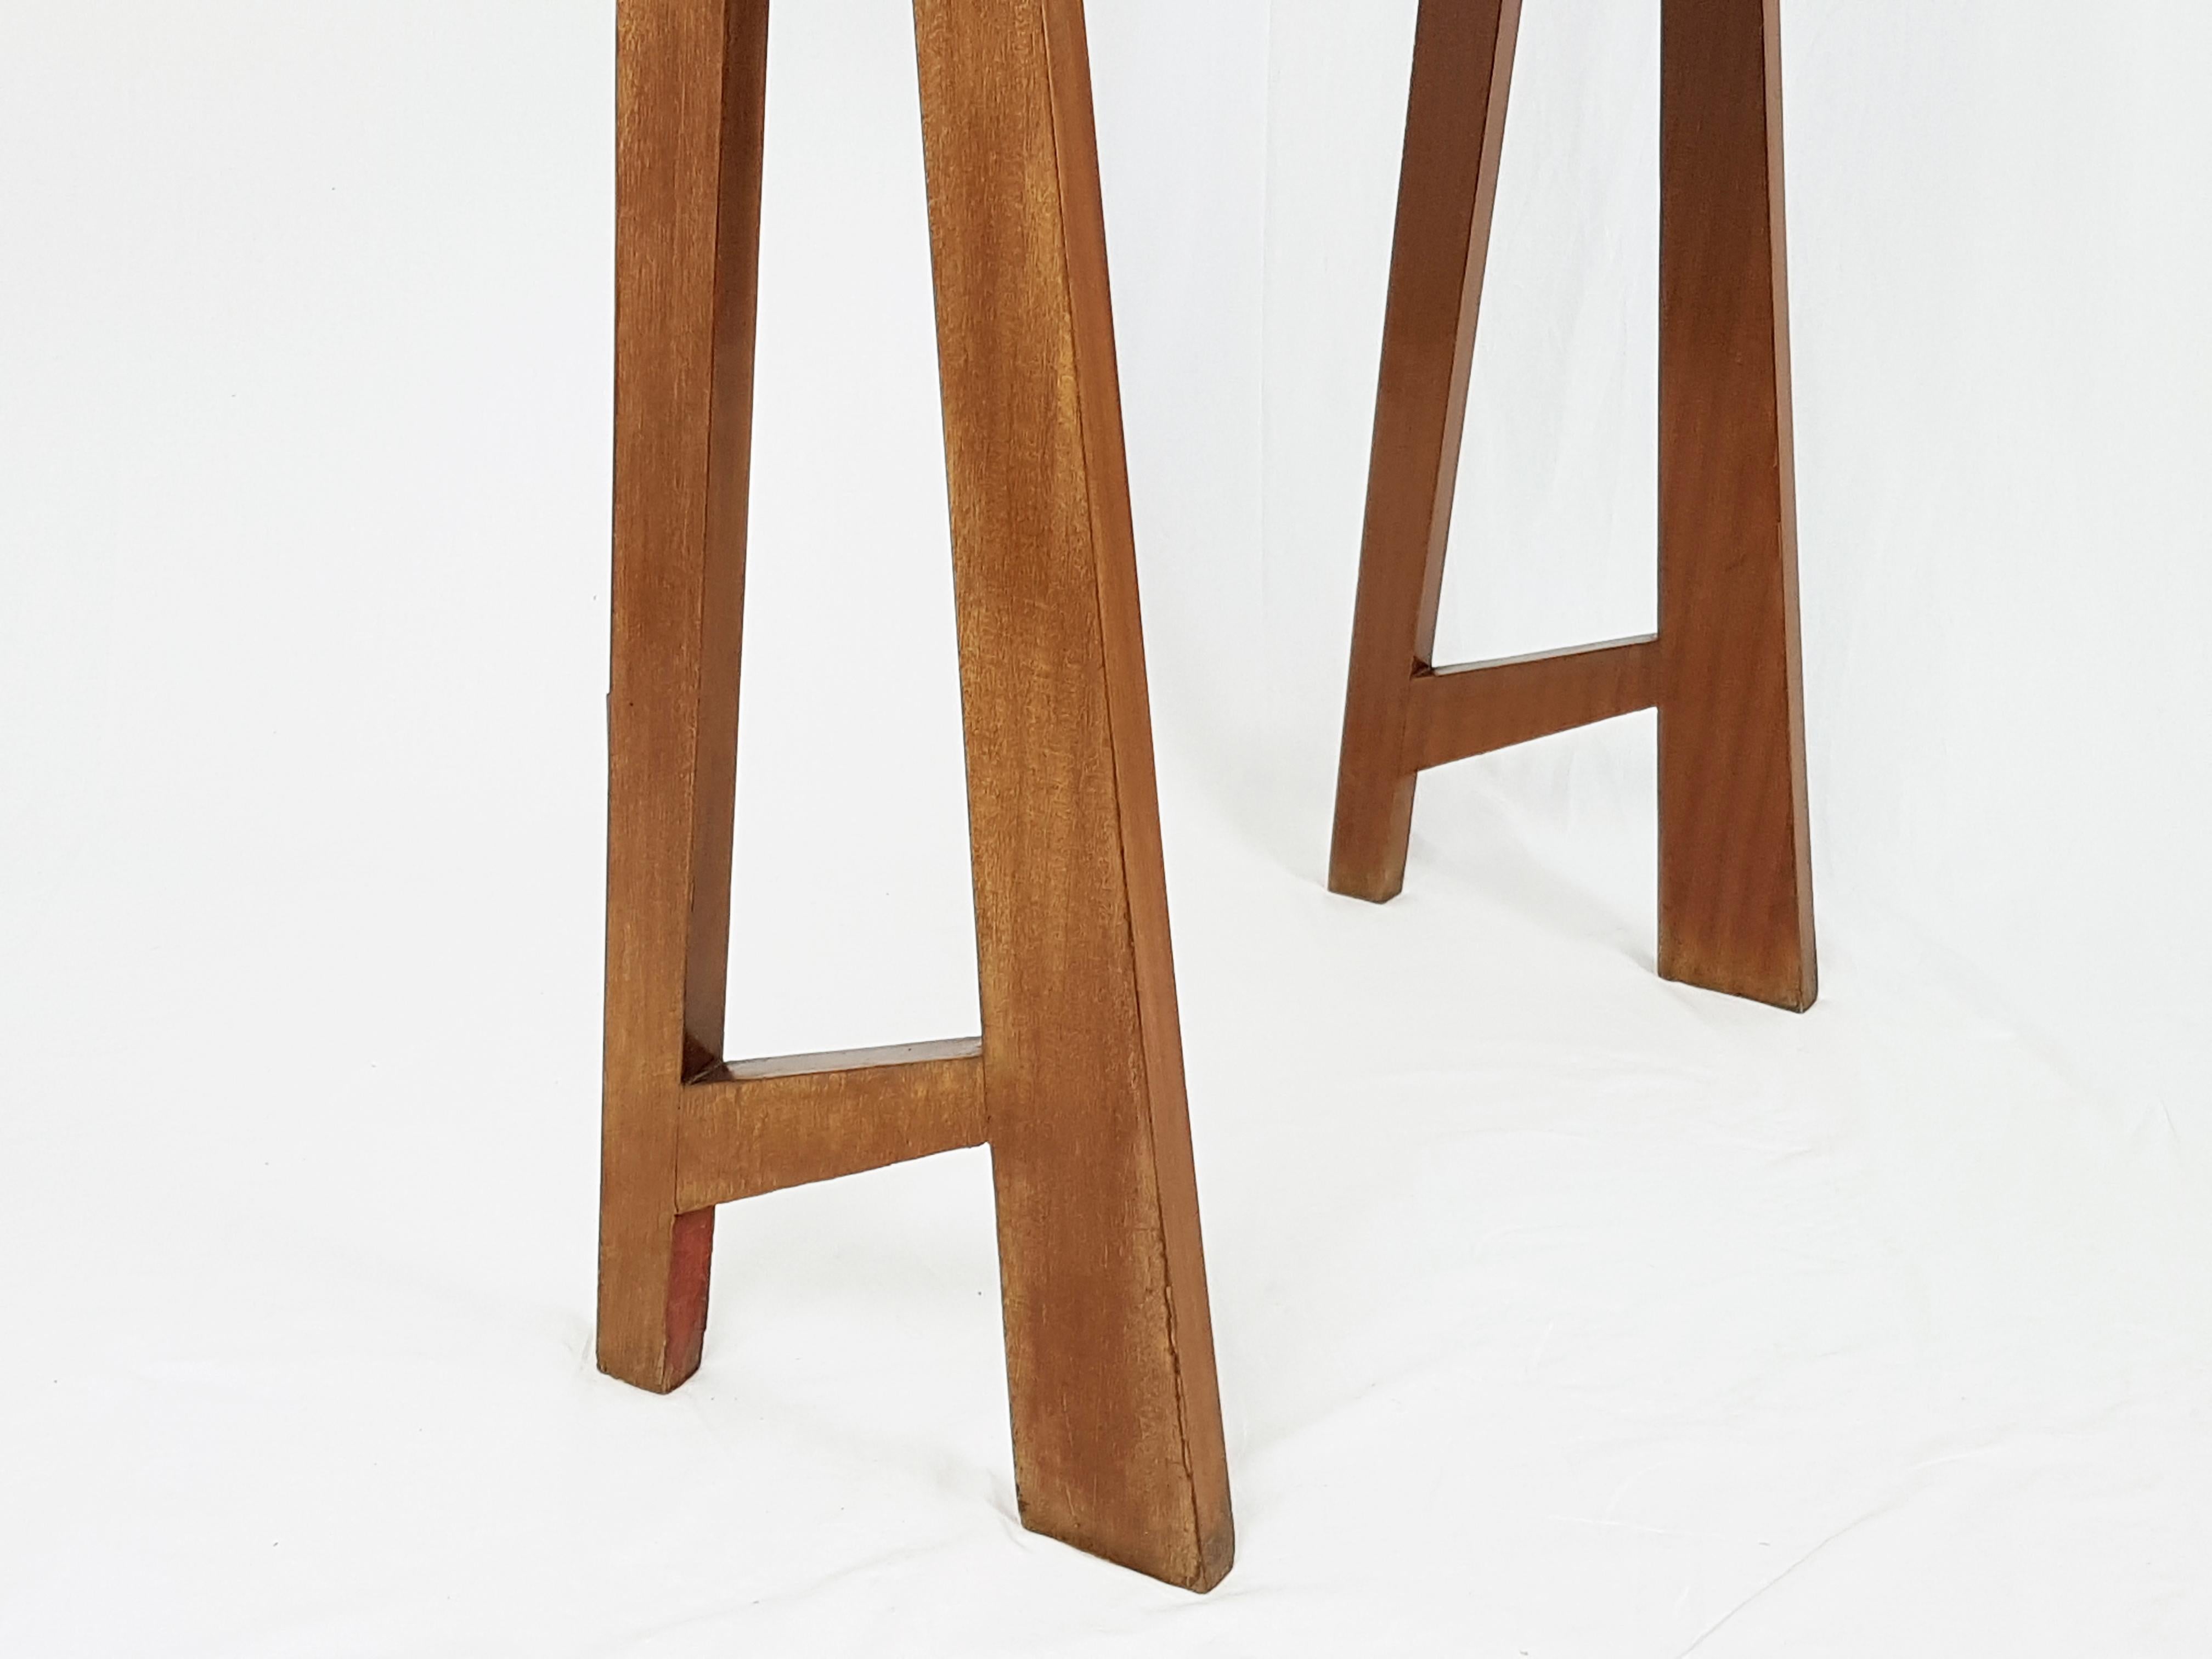 Teak and Brass Midcentury Free Standing Bookshelf Attributed to ISA For Sale 4